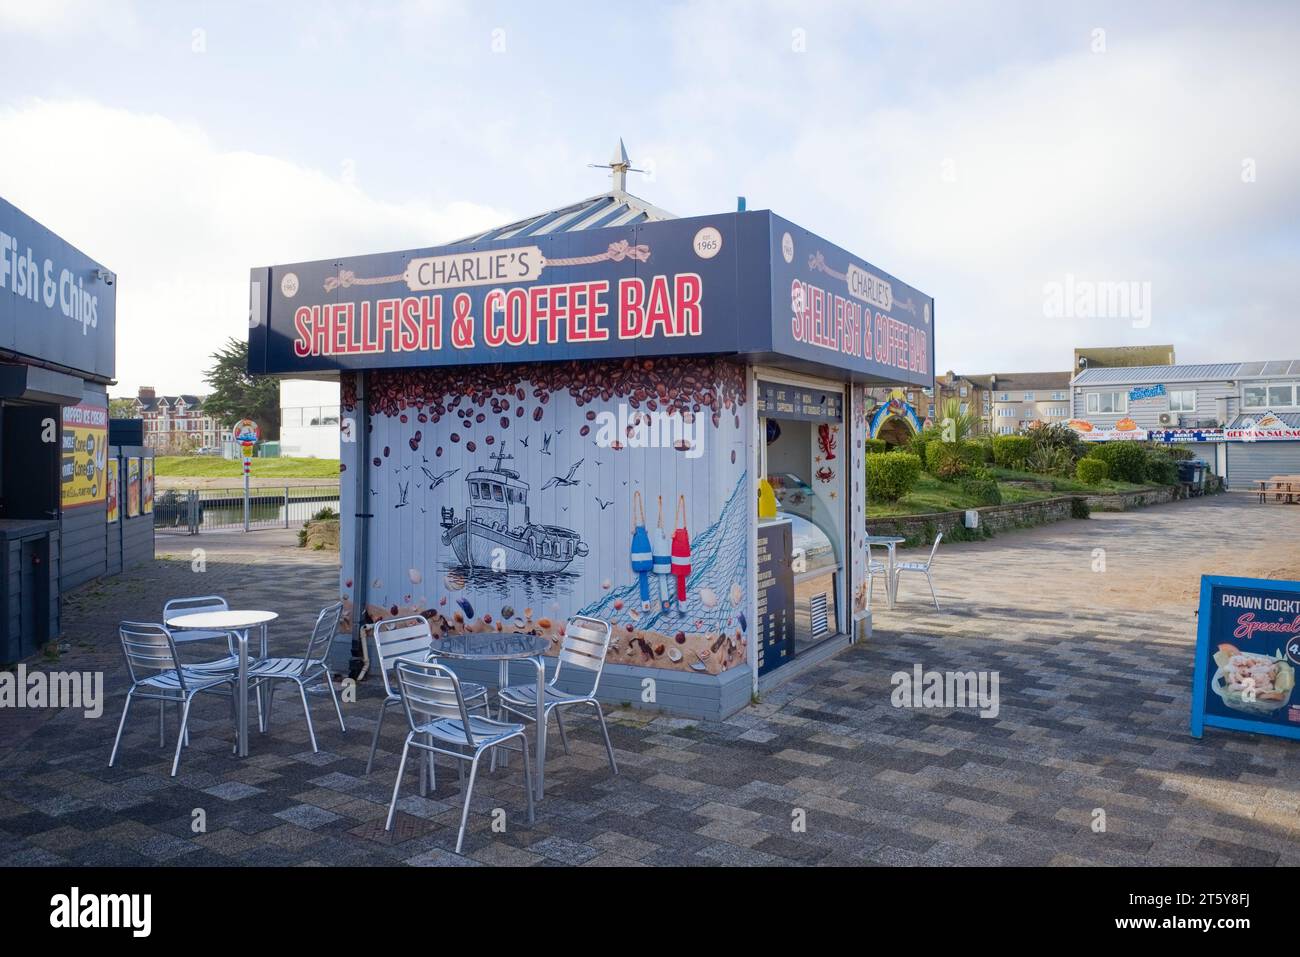 Charlie's shellfish and coffee bar stall near the seafront in Skegness Stock Photo